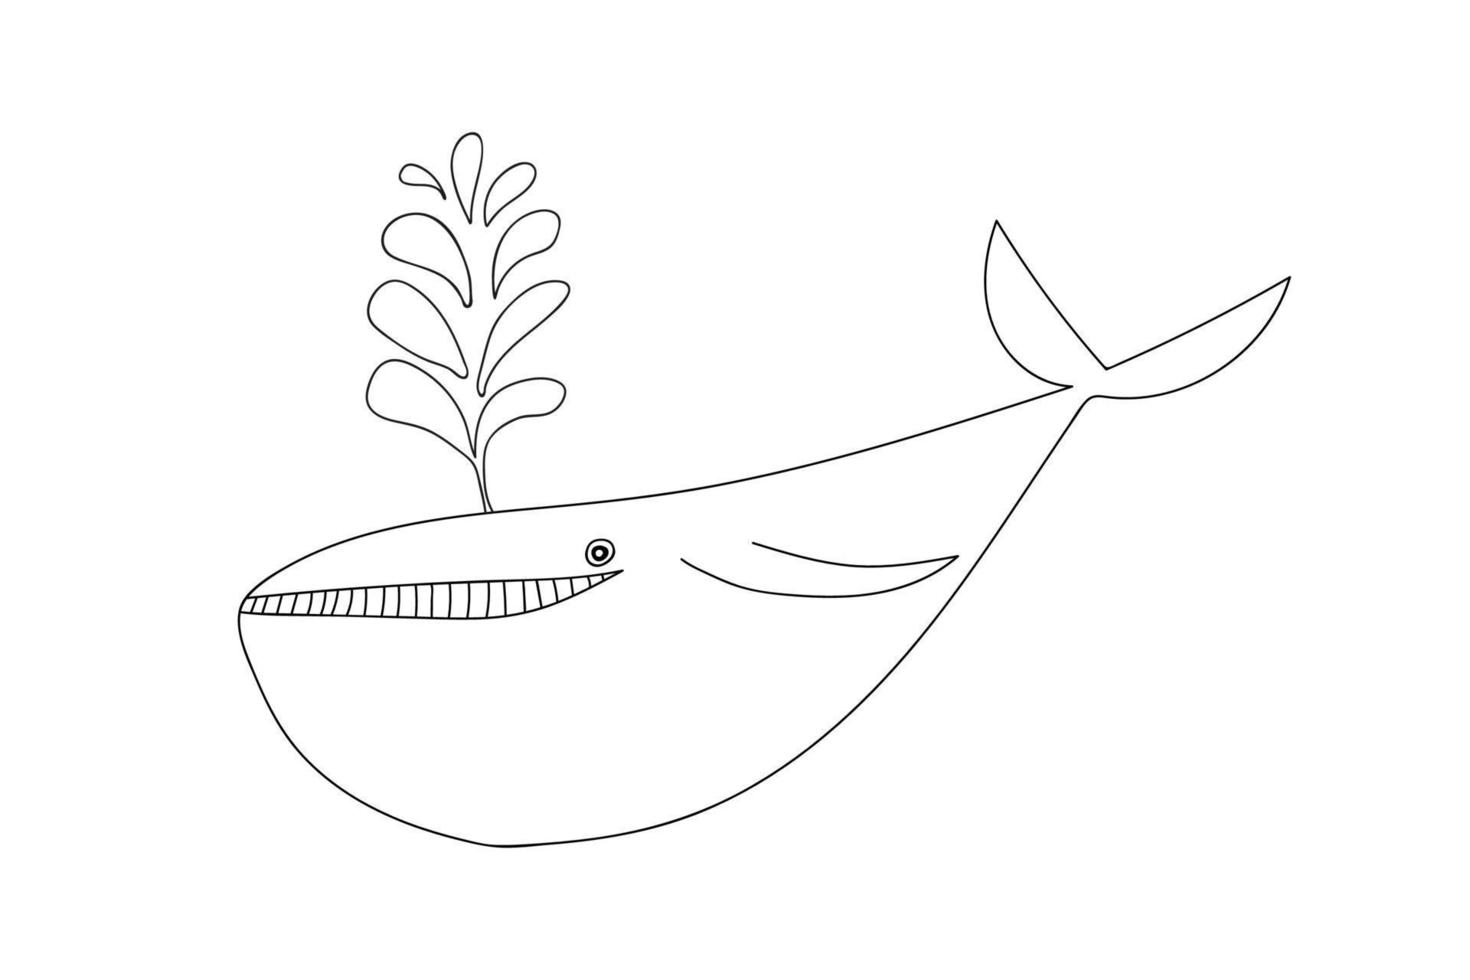 Cute whale doodle illustration. Vector hand drawn whale isolated. Coloring page for children.